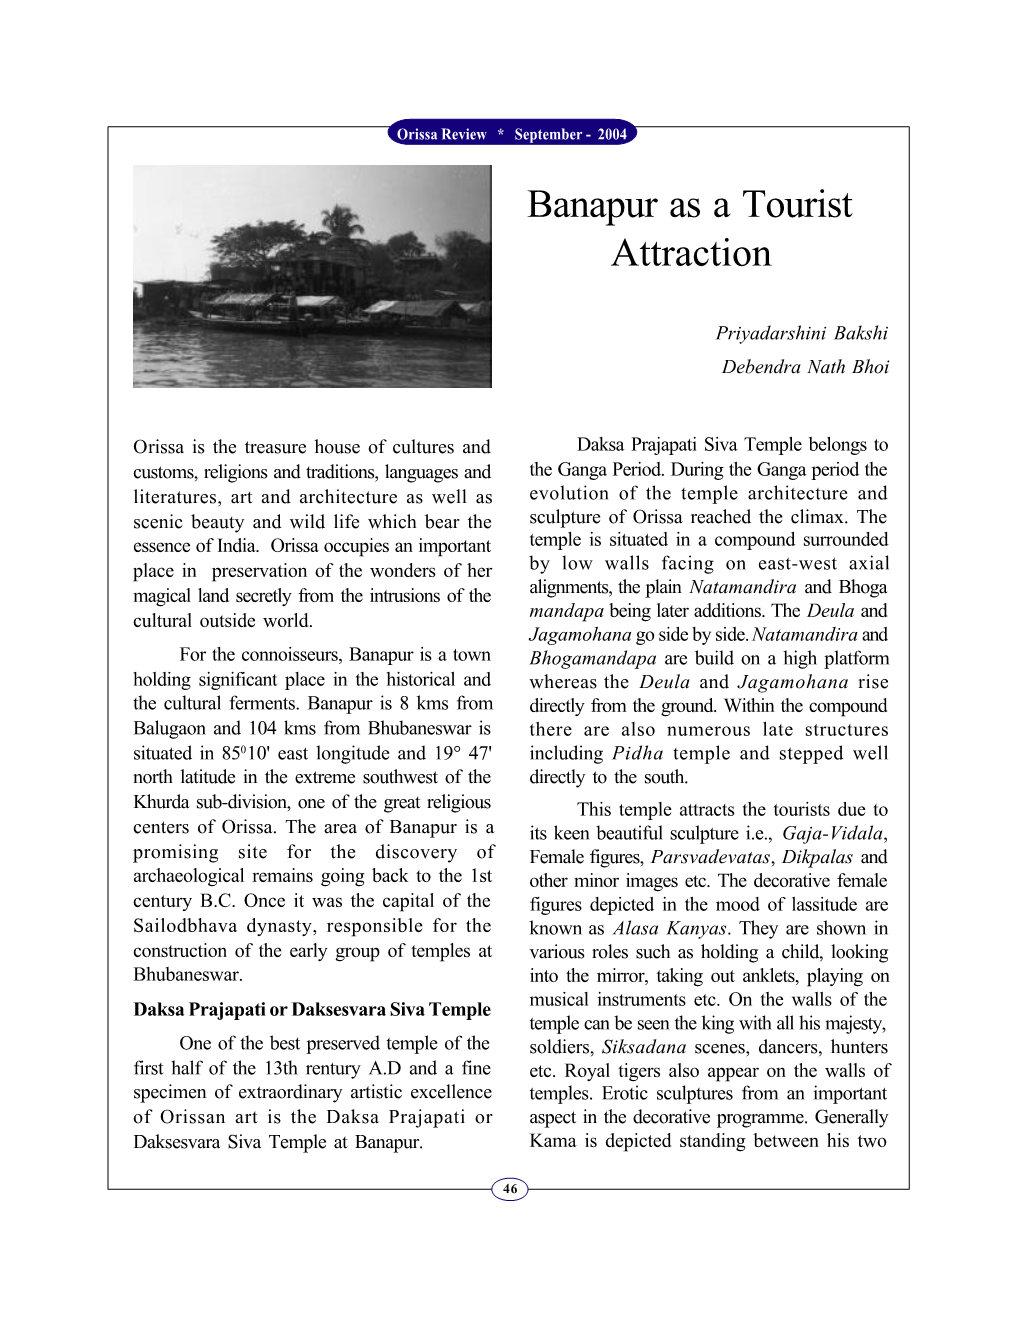 Banapur As a Tourist Attraction